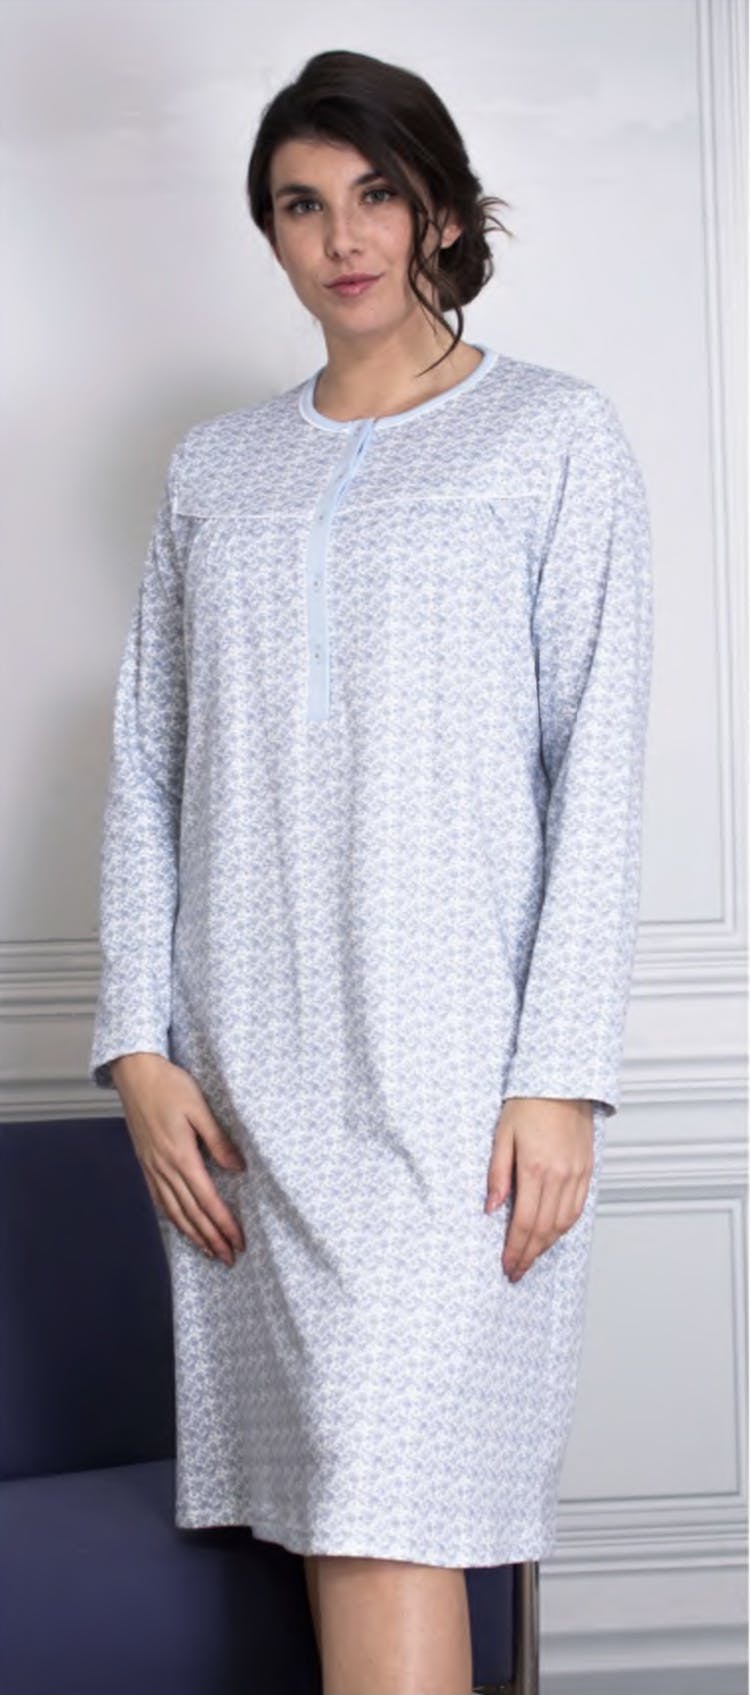 Classic fit round neck five button nightgown.